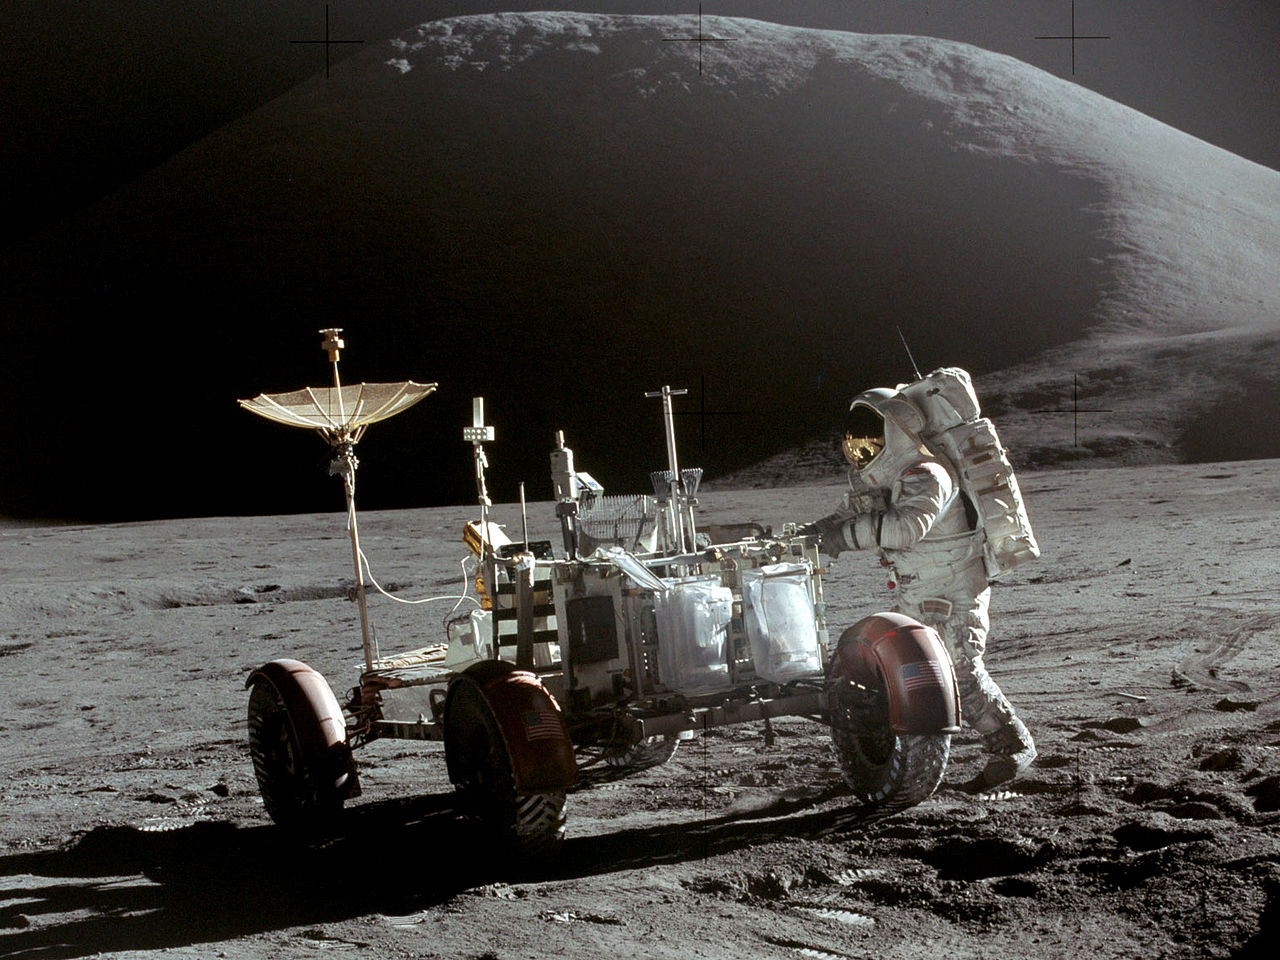 Astronaut Jim Irwin of Apollo 15 with the Apennines mountains in the background (credit:- NASA)